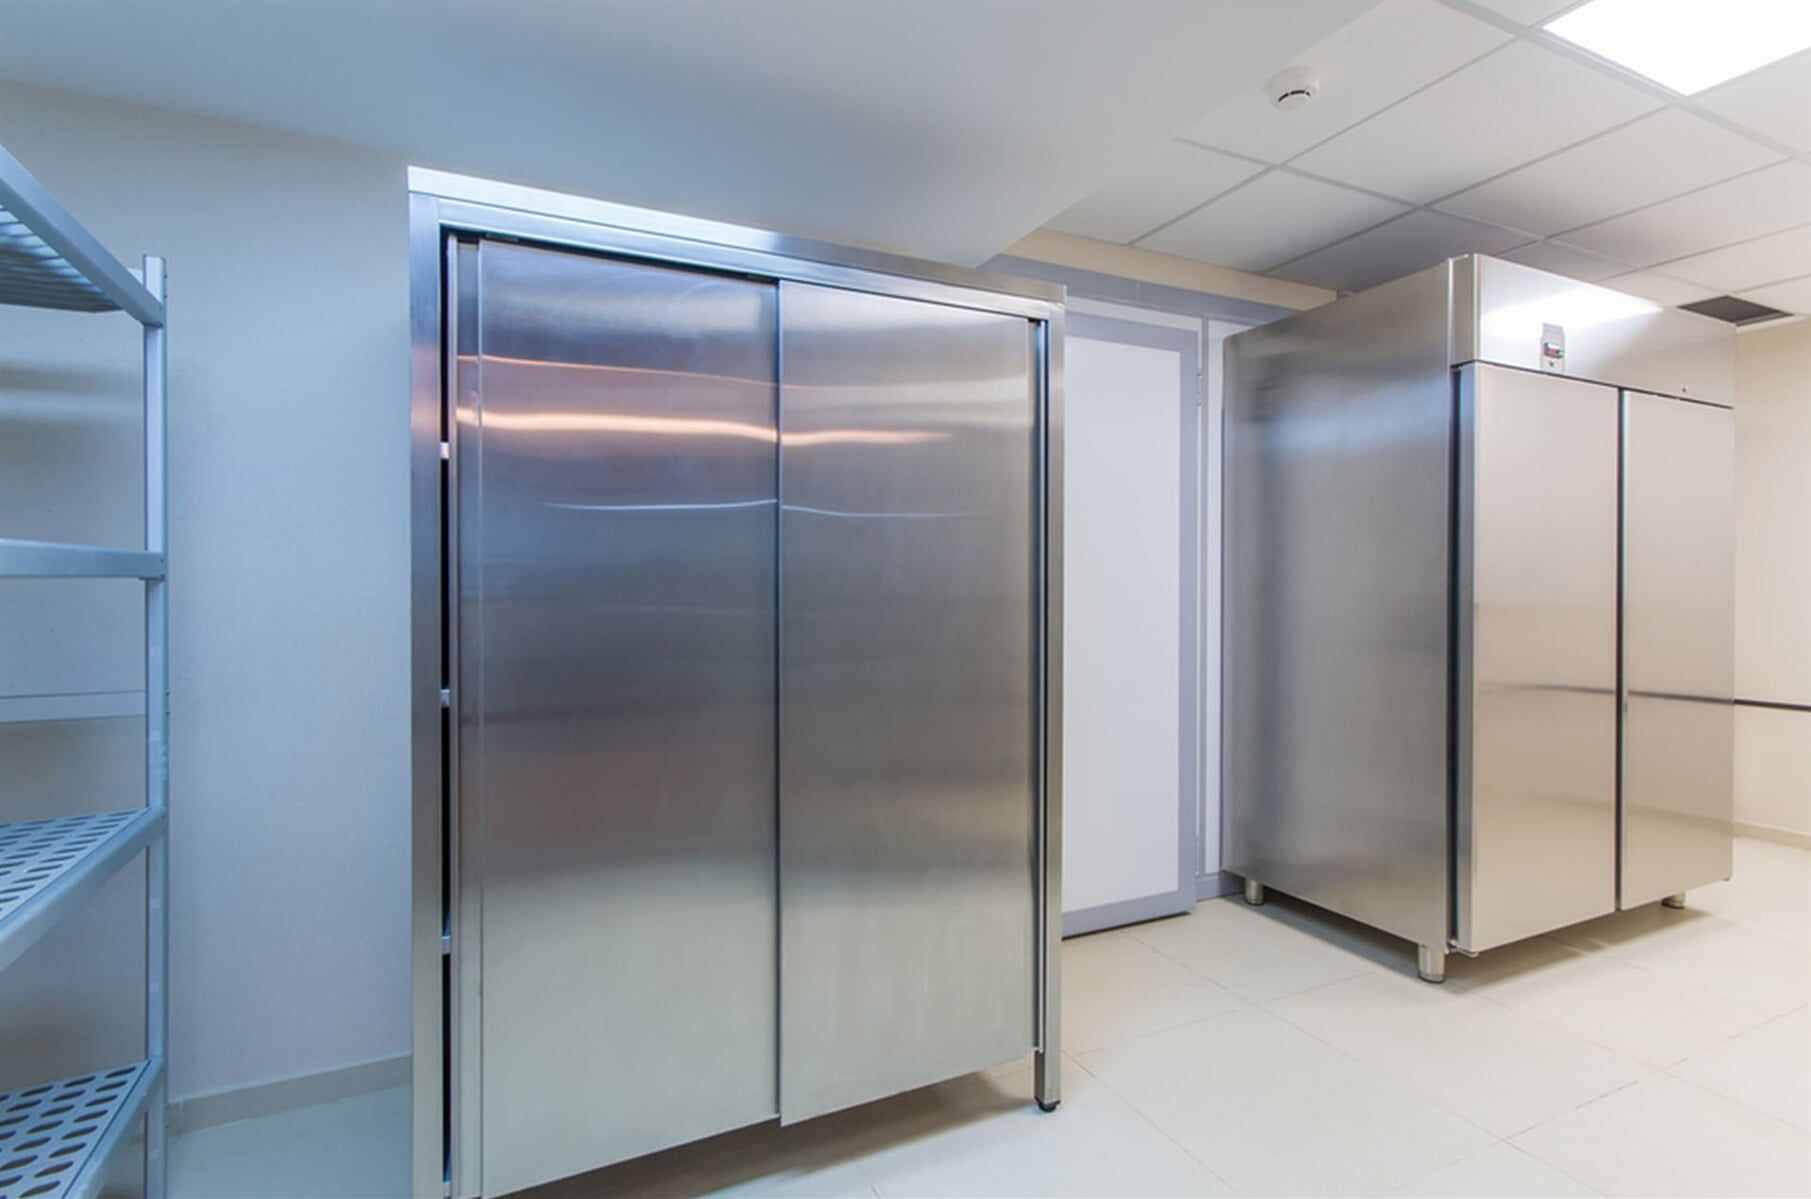 Fridge and Shelves in a Professional Kitchen — Air Conditioning & Refrigeration Services in Coffs Harbour, NSW